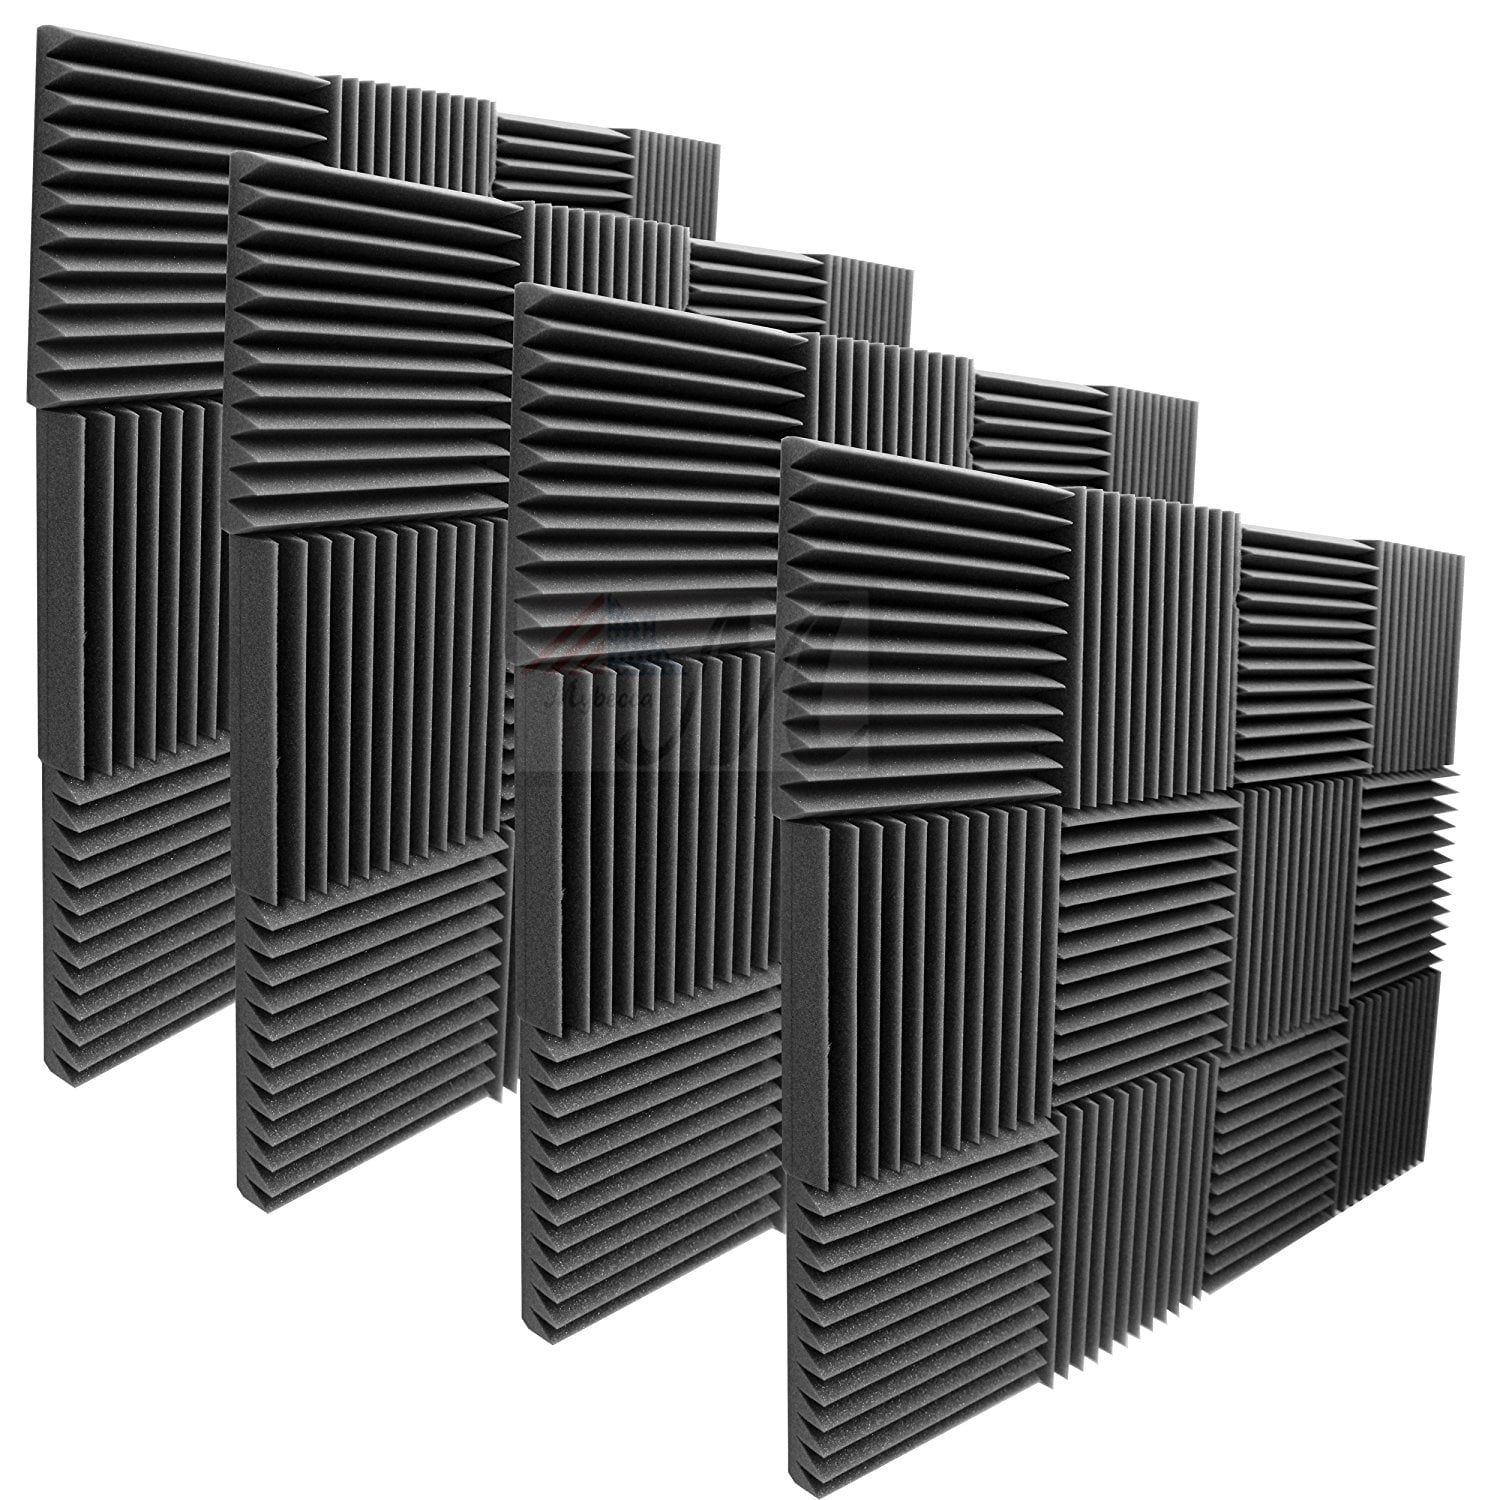 12-Pack Acoustic Foam Panels Wedges Home Studios 2’’ x 12’’ x 12’’ Offices Recording Studios Fireproof Soundproofing Foam Noise Cancelling Foam for Studios 